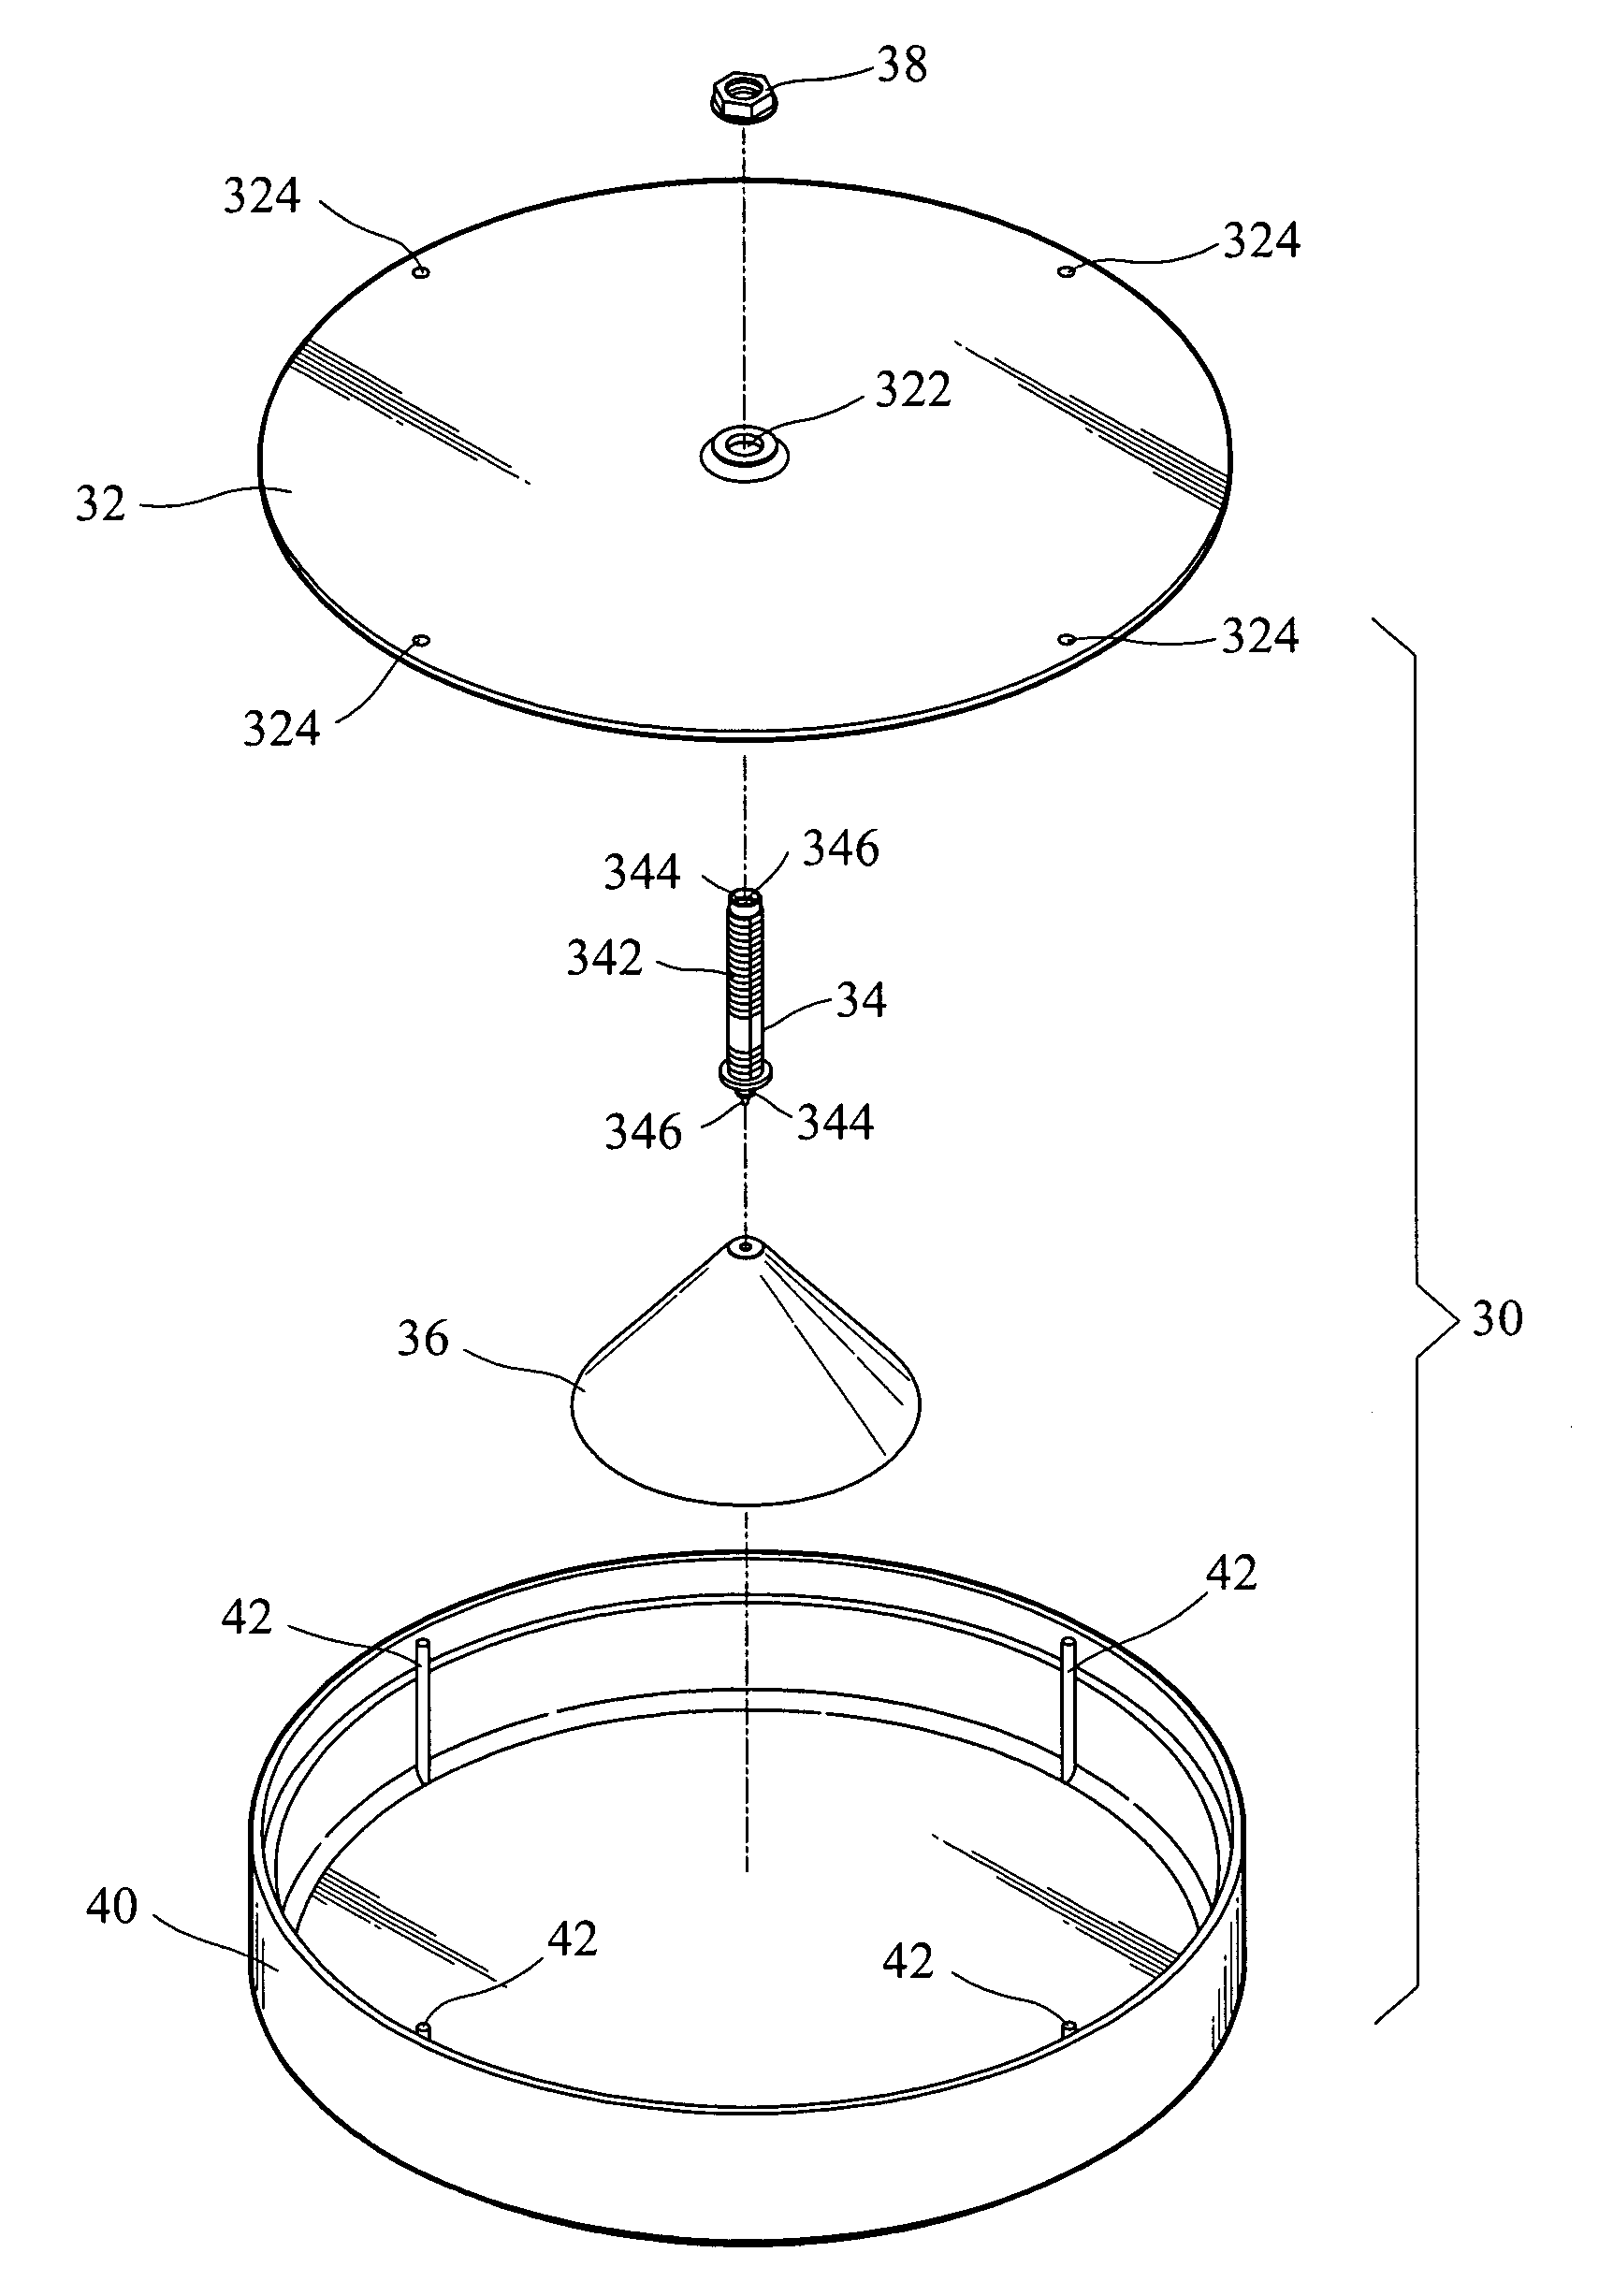 Antenna structure assembly